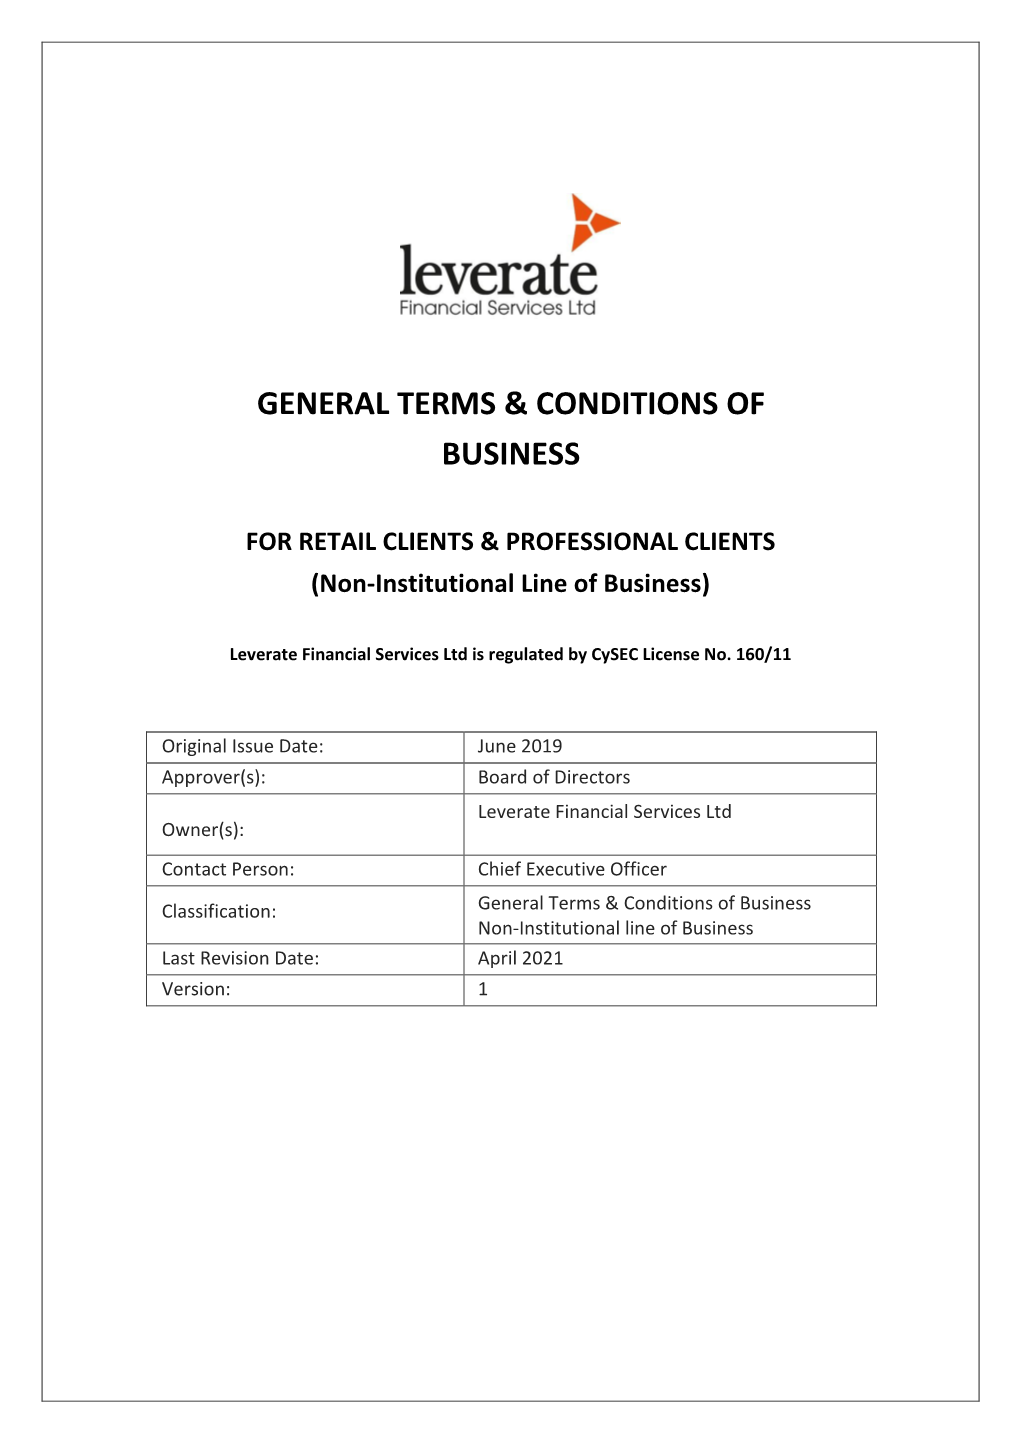 General Terms & Conditions of Business